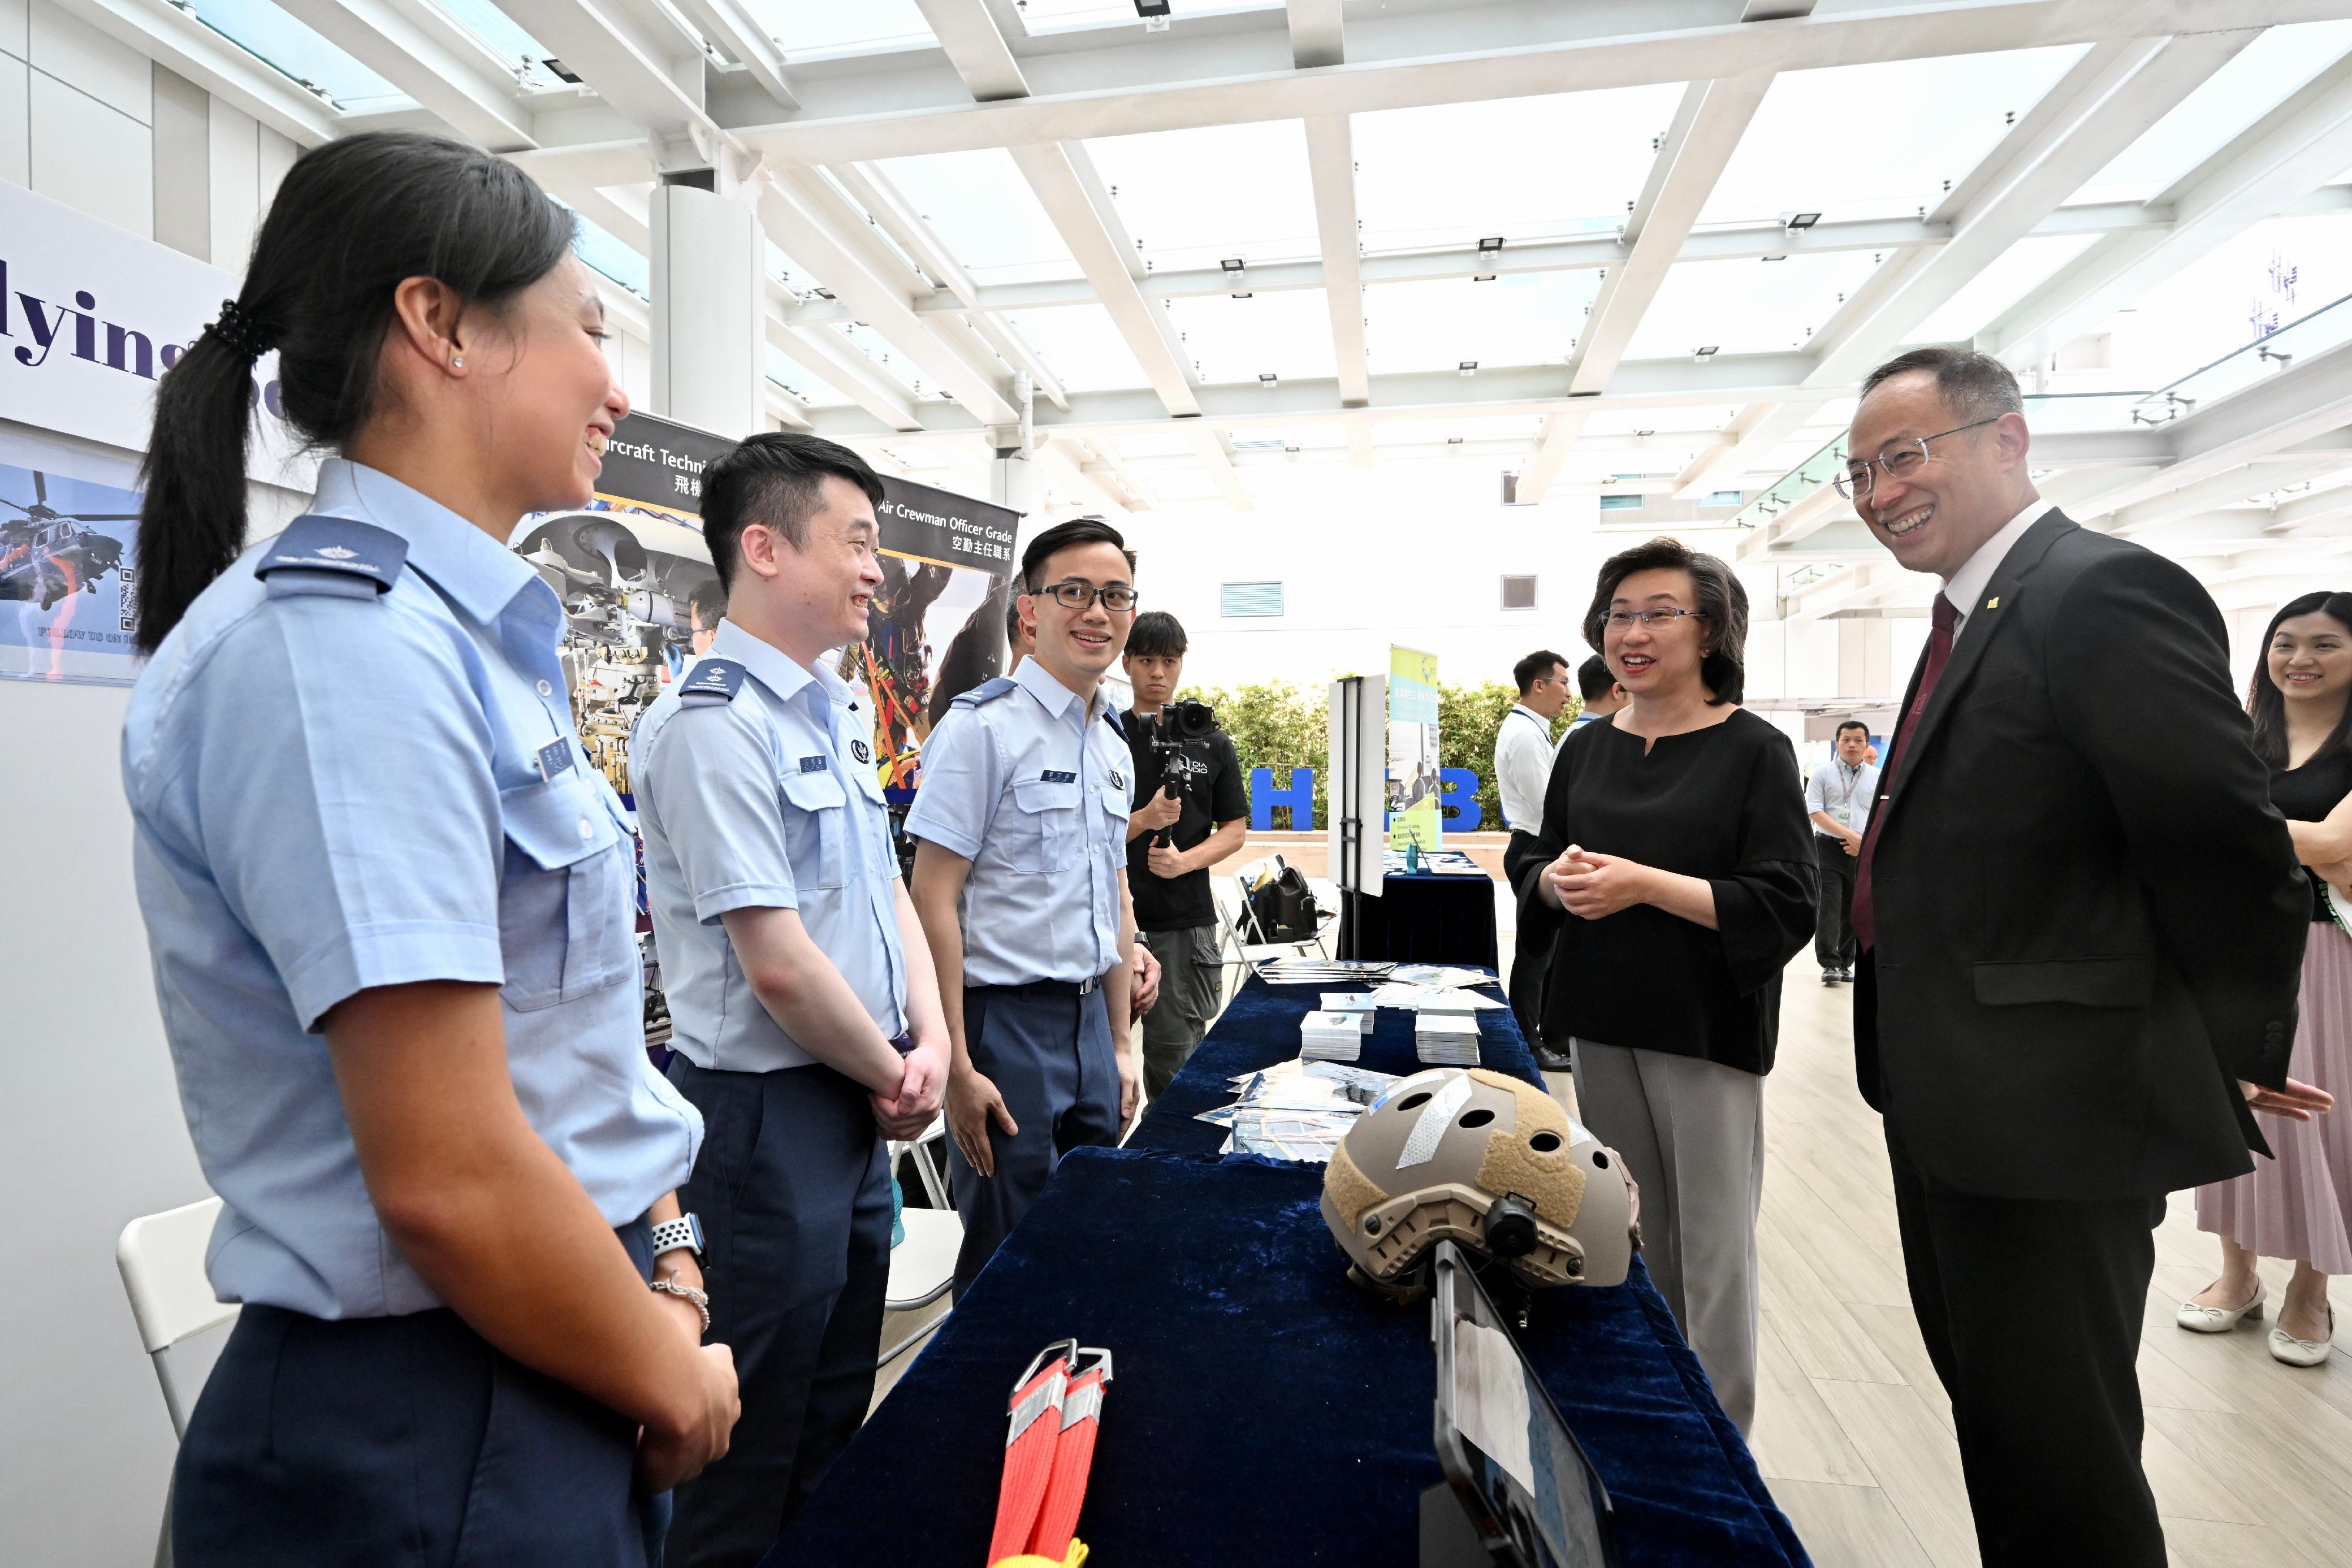 The Secretary for the Civil Service, Mrs Ingrid Yeung, visited the Government Career Fair being held at the campus of Hong Kong Baptist University (HKBU) today (September 20) to learn more about the career aspirations of students and encourage them to join the civil service and serve the community. Photo shows Mrs Yeung (second right) visiting the booth set up by the Government Flying Service. Looking on is the President and Vice-Chancellor of HKBU, Professor Alexander Wai (first right).